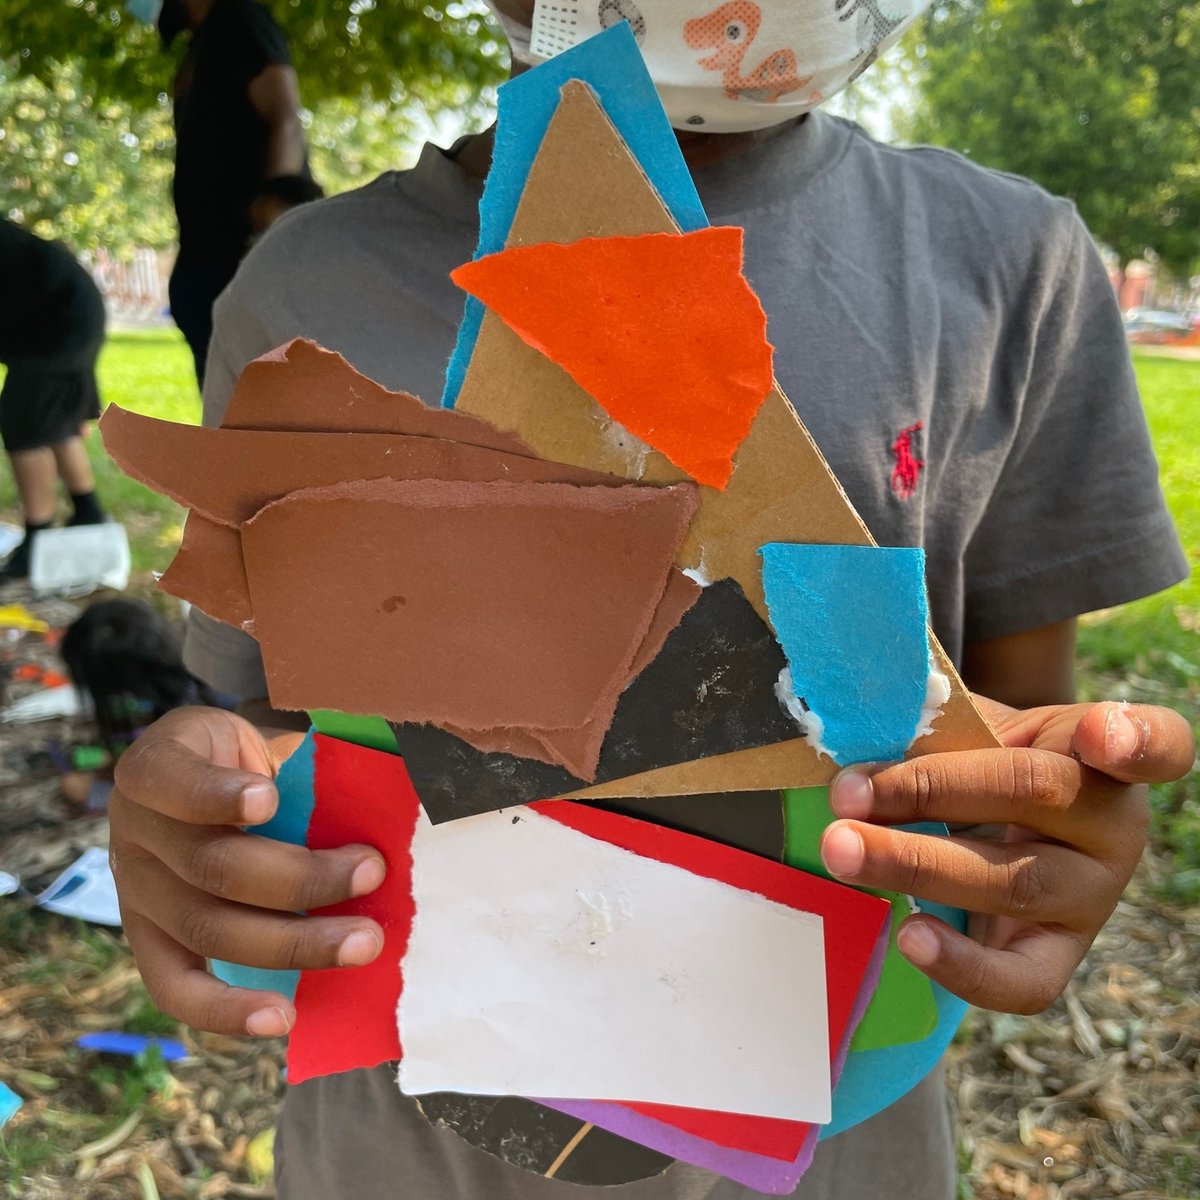 Join us tomorrow, July 7 from 9:30-11:30am for a torn paper collage workshop as part of the Barnes Early Learner workshop series at Fleisher. Workshops in the series are free and include materials. No registration required.⁠